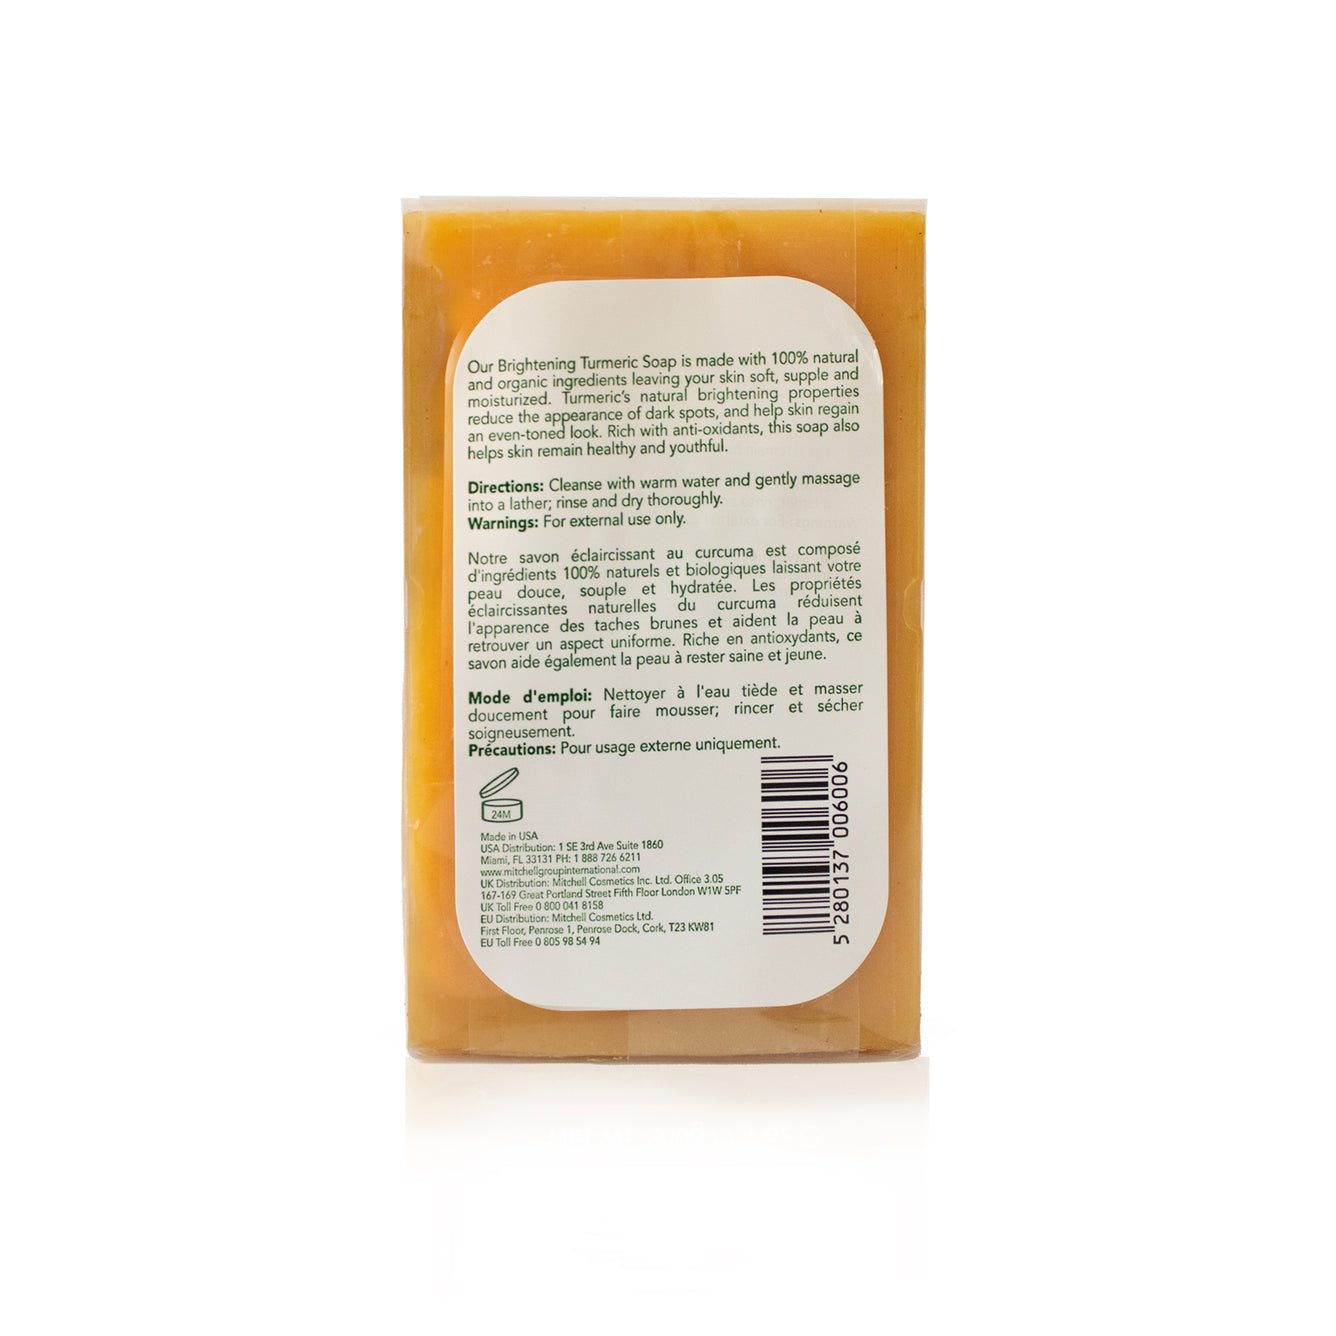 Organic Extract Tumeric Soap 200g Mitchell Brands - Mitchell Brands - Skin Lightening, Skin Brightening, Fade Dark Spots, Shea Butter, Hair Growth Products